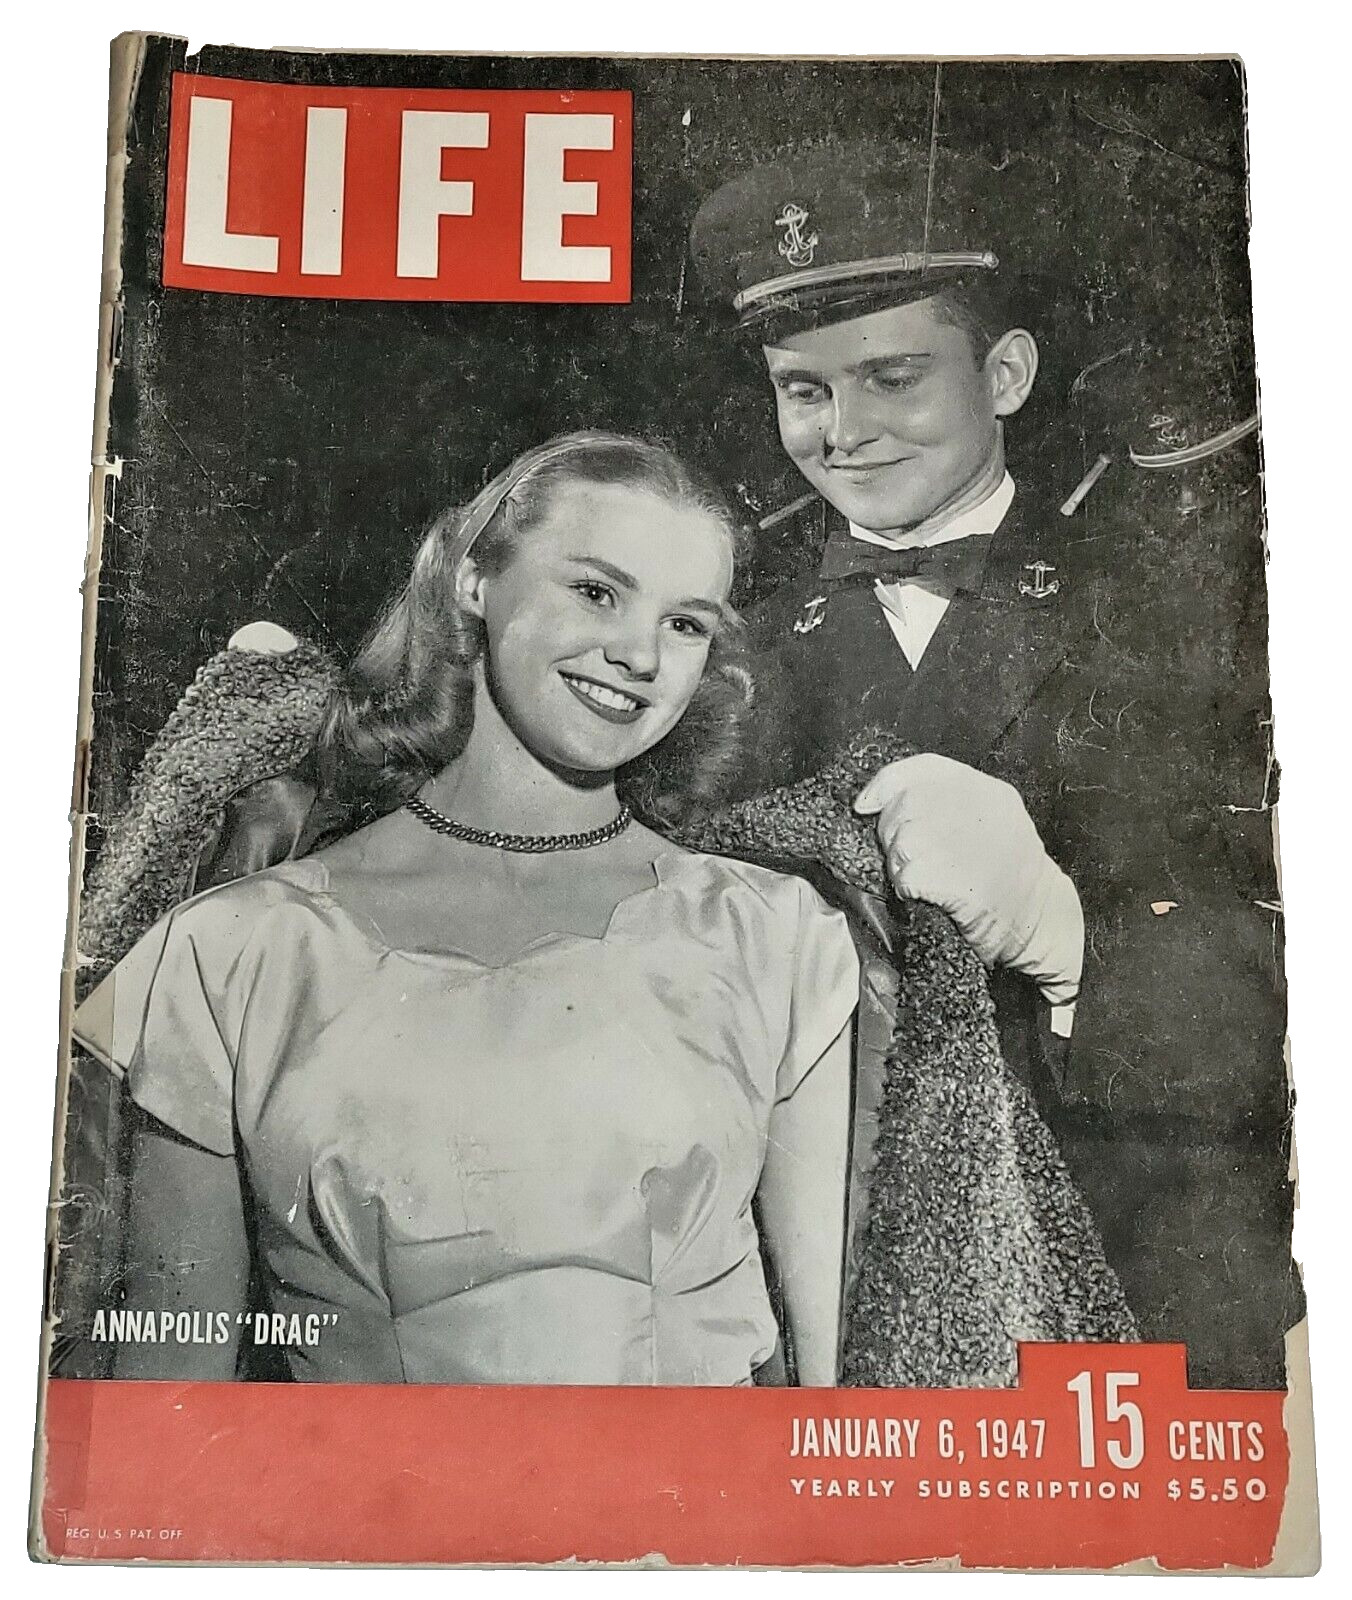 January 6, 1947 LIFE Magazine Old Ads 40s advertising adds  Jan 1 7